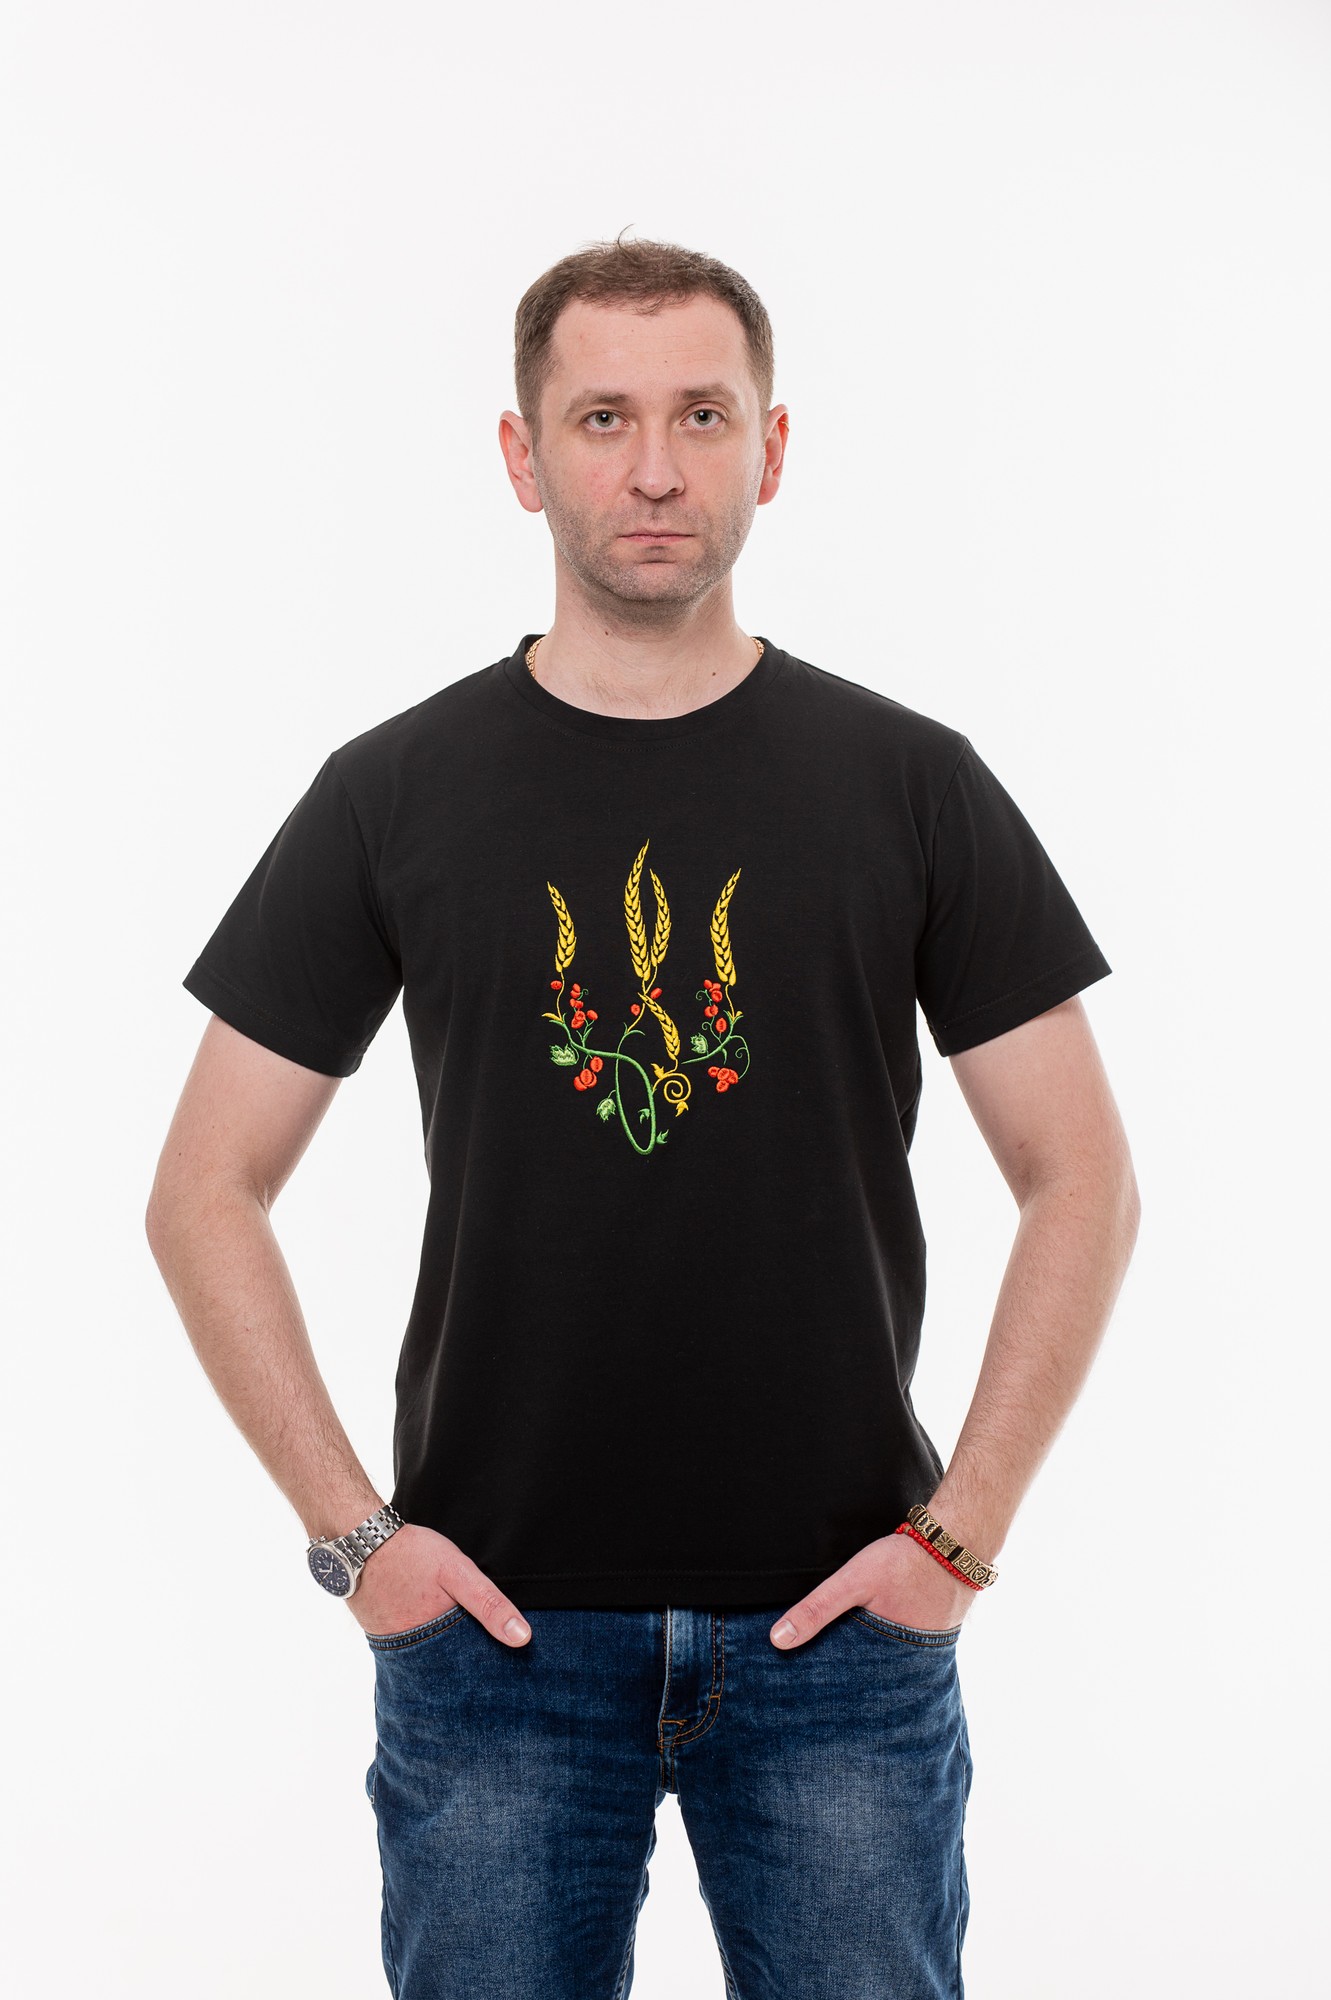 Men's t-shirt with embroidery "Ukrainian tryzub red Kalina" black. Support Ukraine